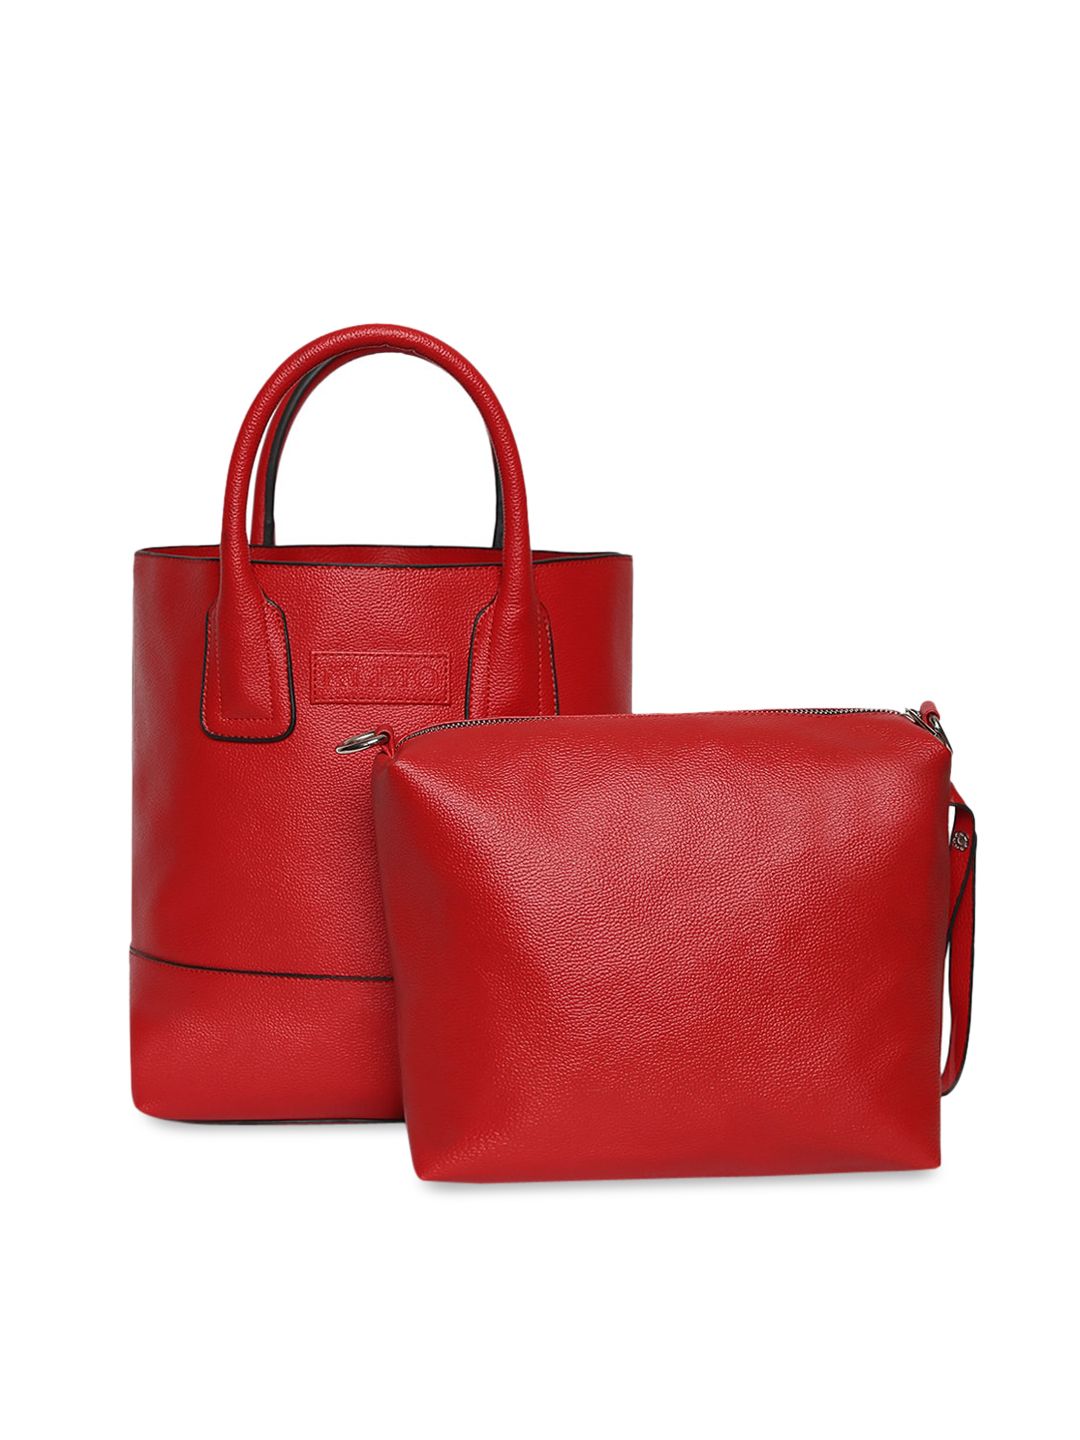 KLEIO Red Solid Tote Bag With Pouch Price in India